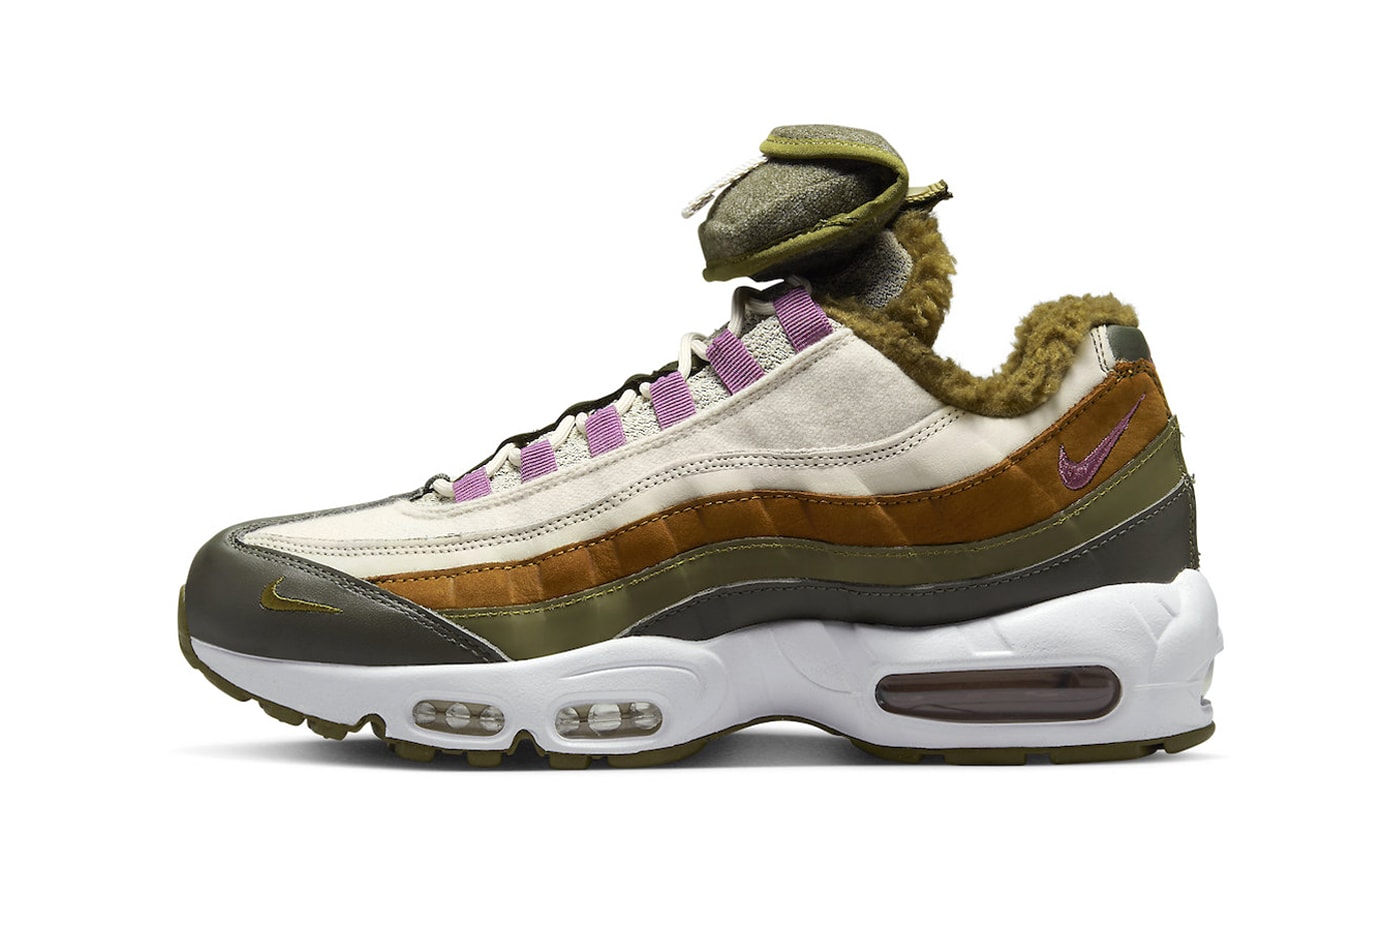 nike air max 95 n7 removable stash pocket native american indigenous green yellow lilac purple release info date price